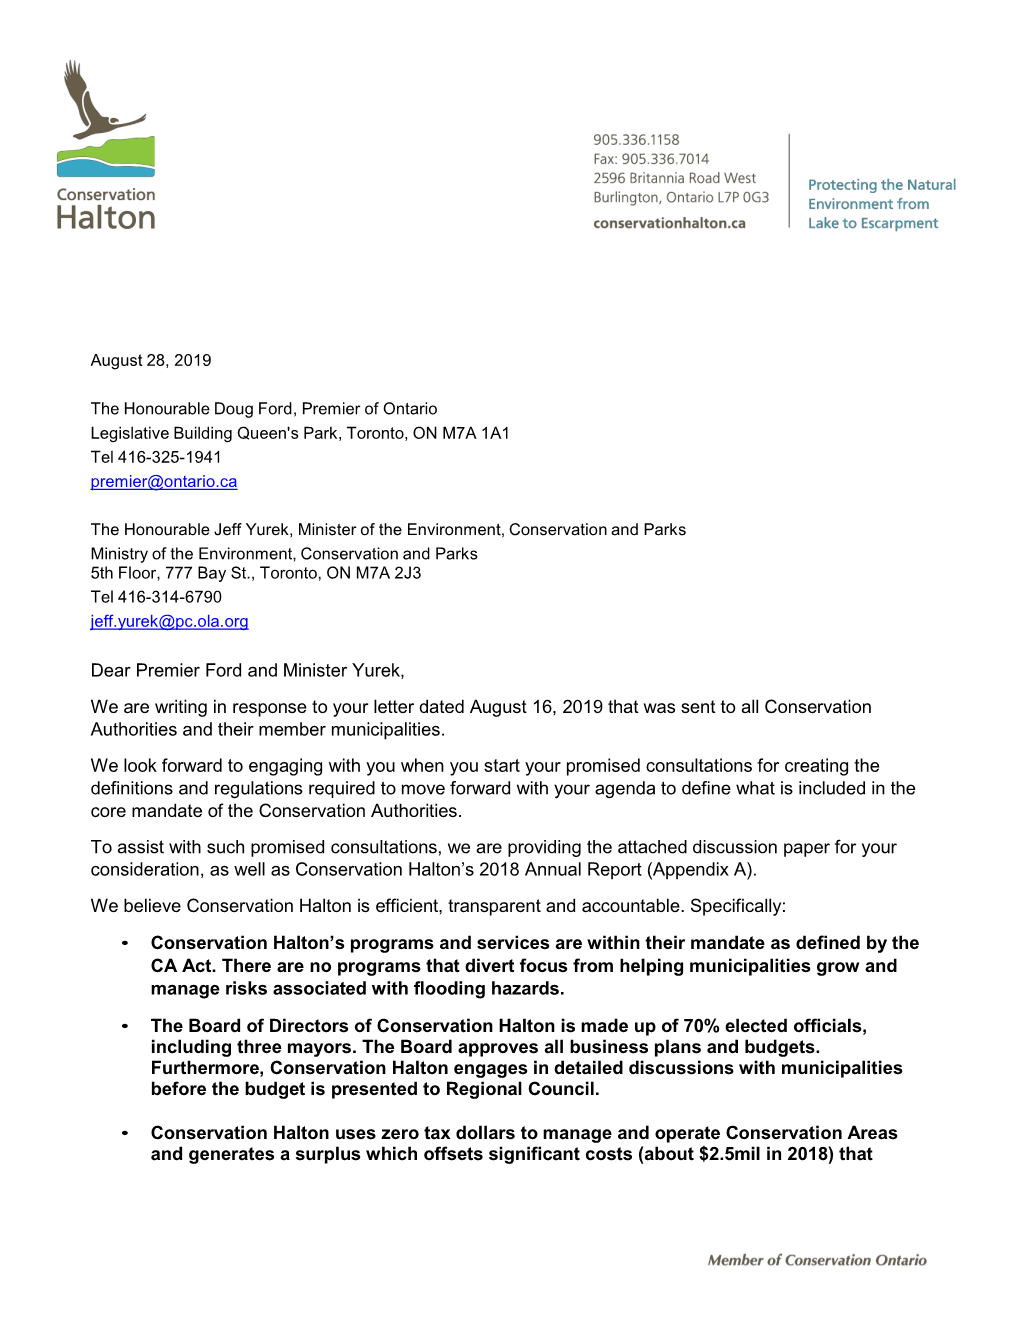 Letter to MECP and Ontario Premier Conservation Halton Board 2019